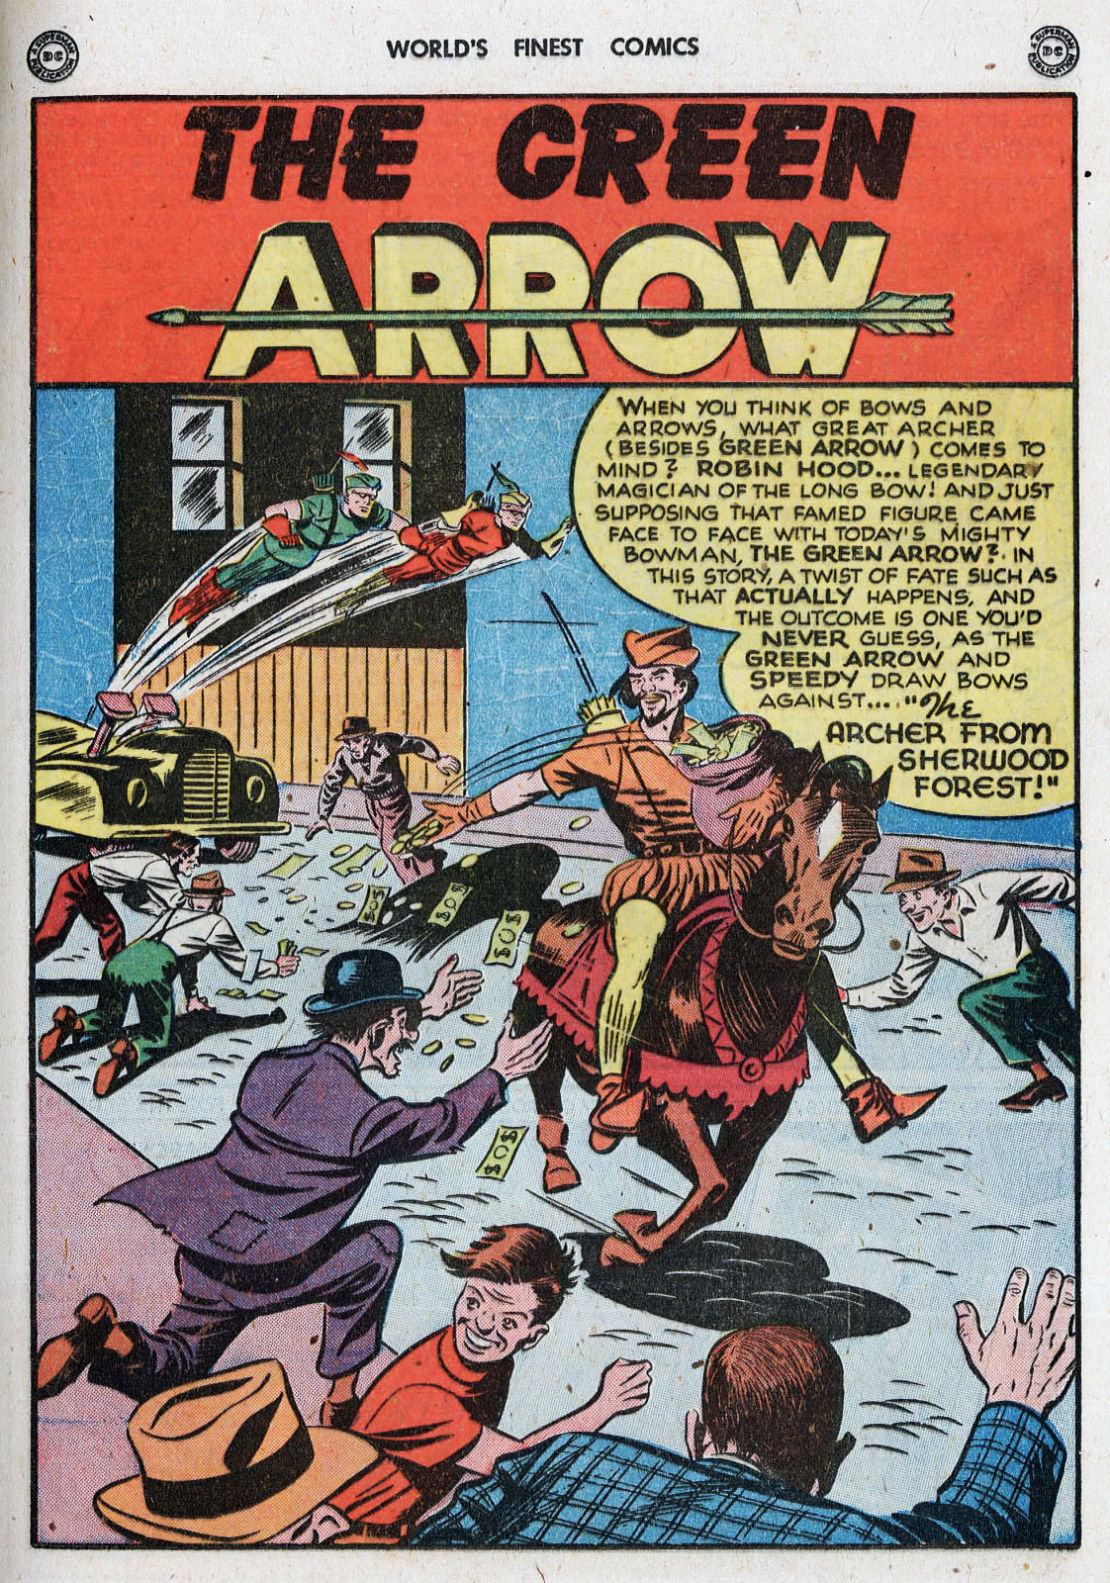 Green Arrow in The Archer from Sherwood Forest, World's Finest Comics #40, art by George Papp